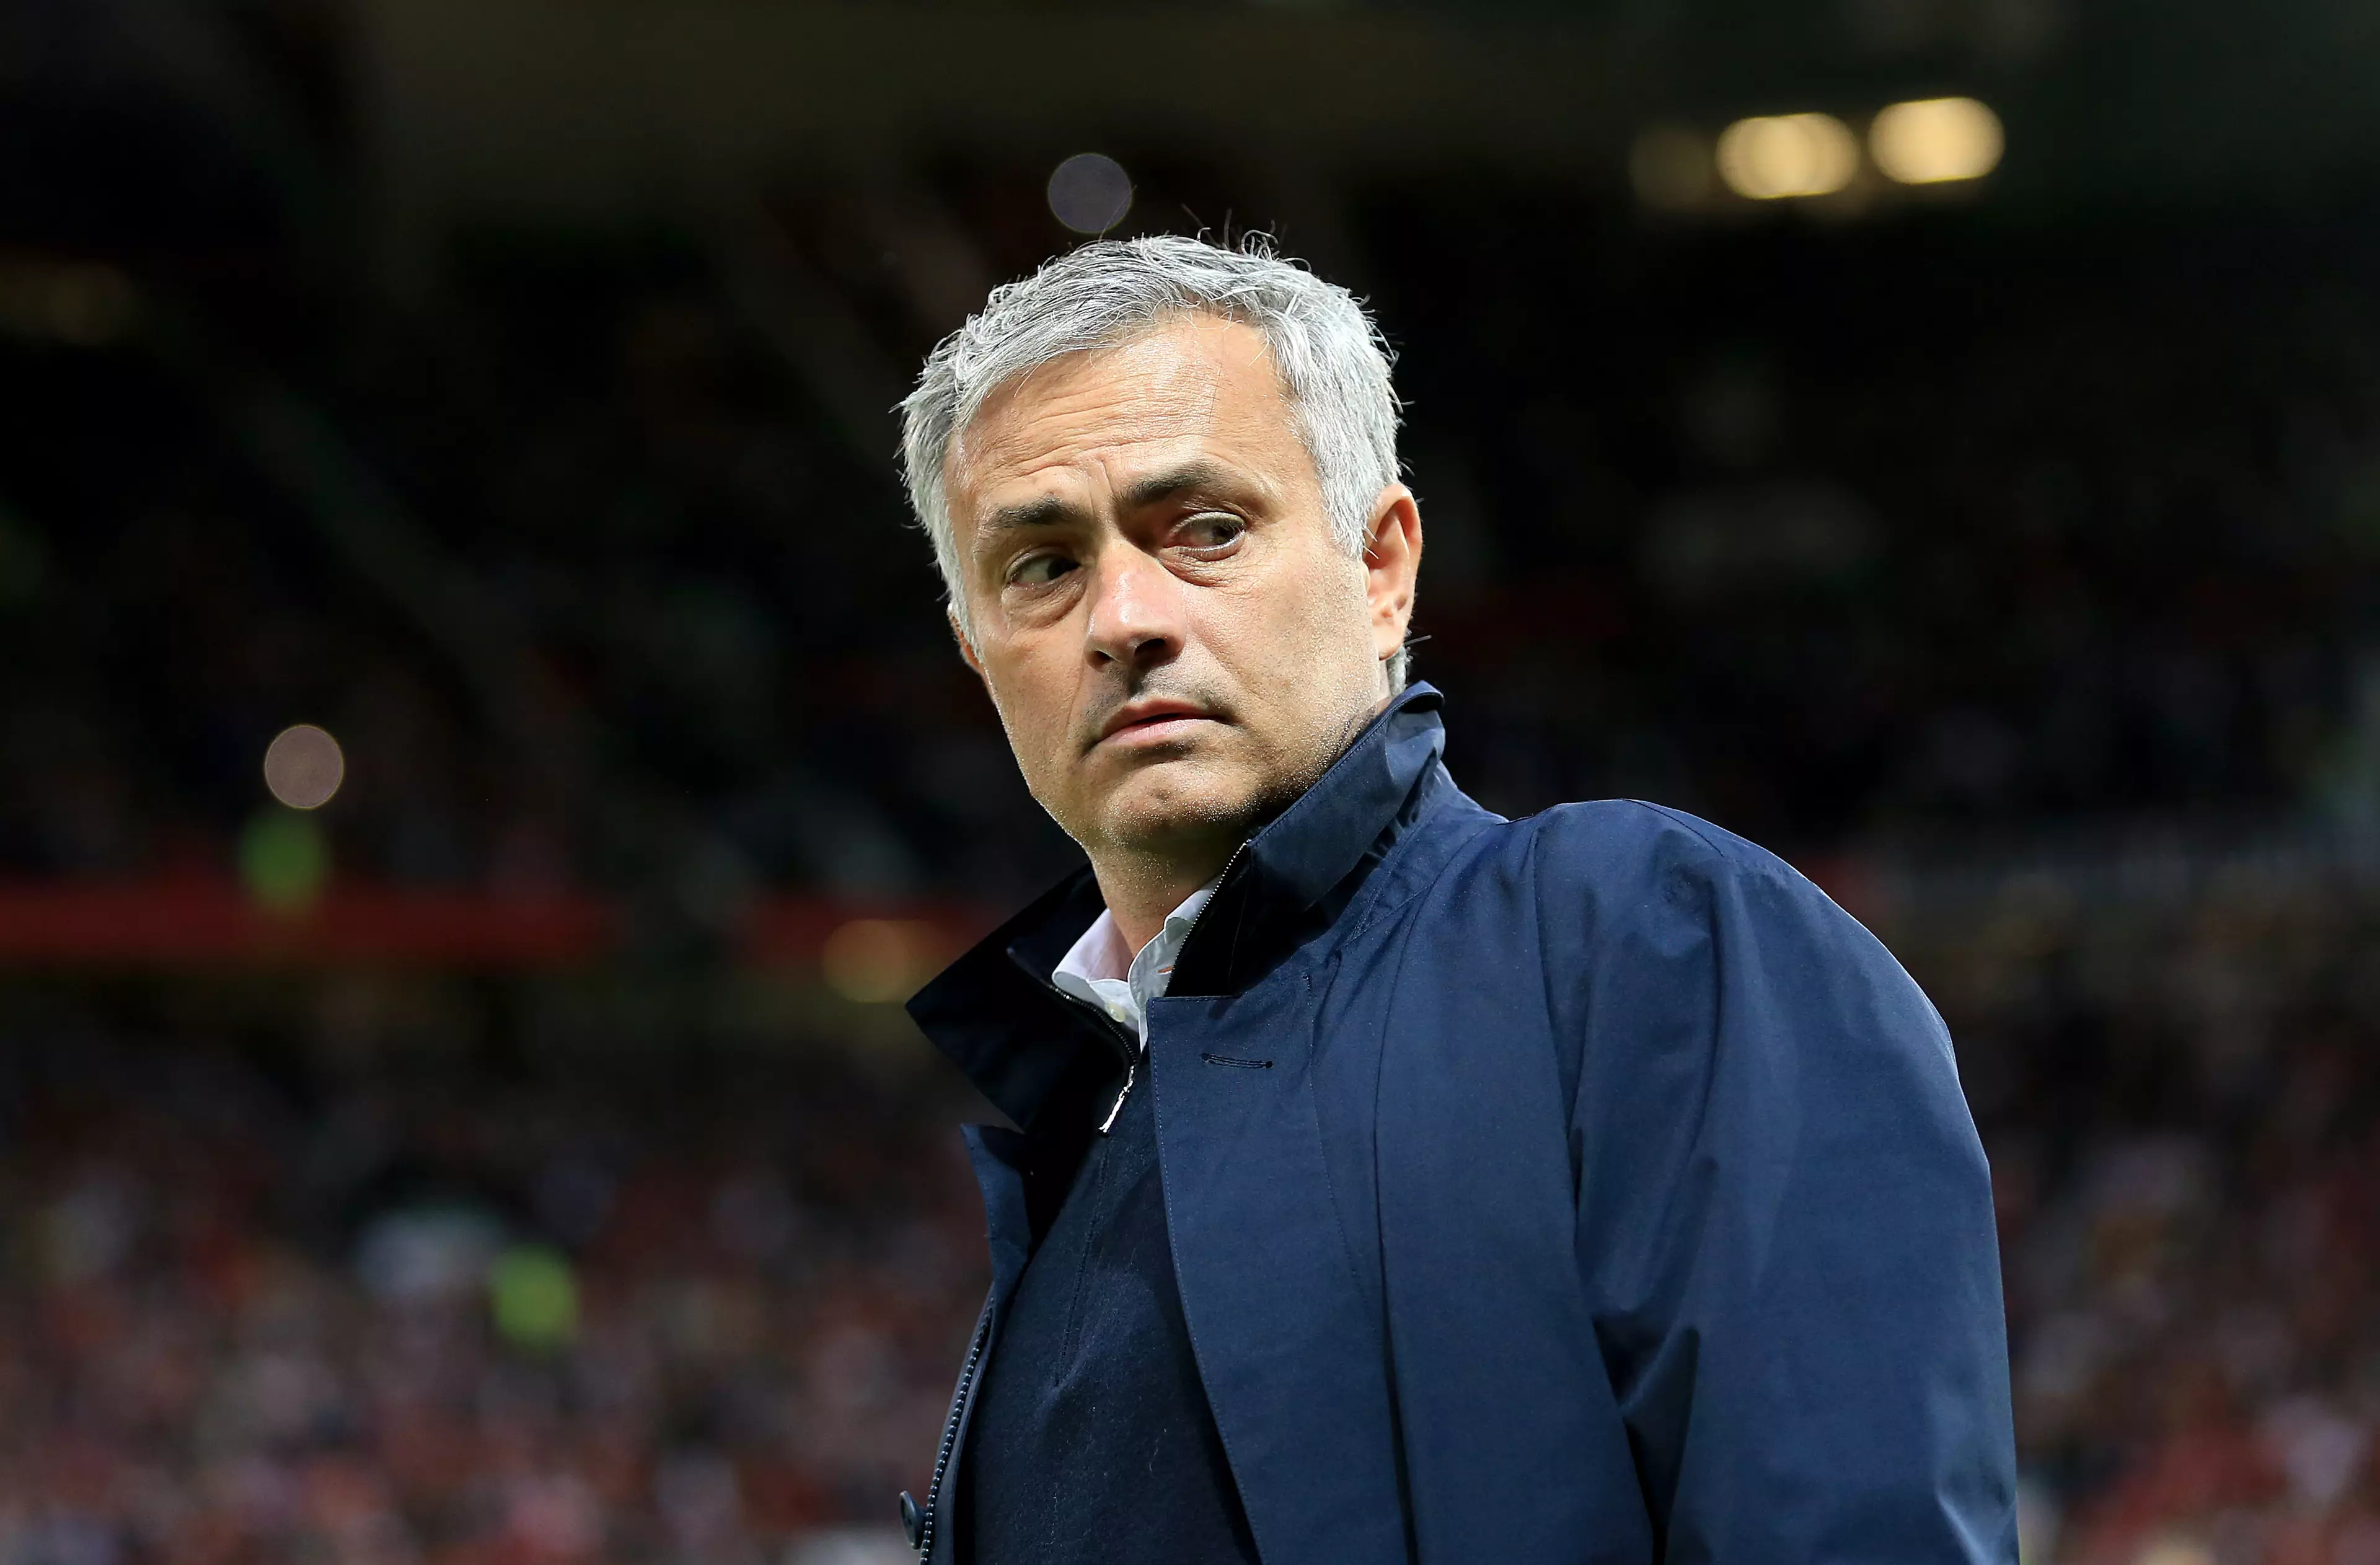 Manchester United Player Tells Mourinho He Wants To Leave Old Trafford